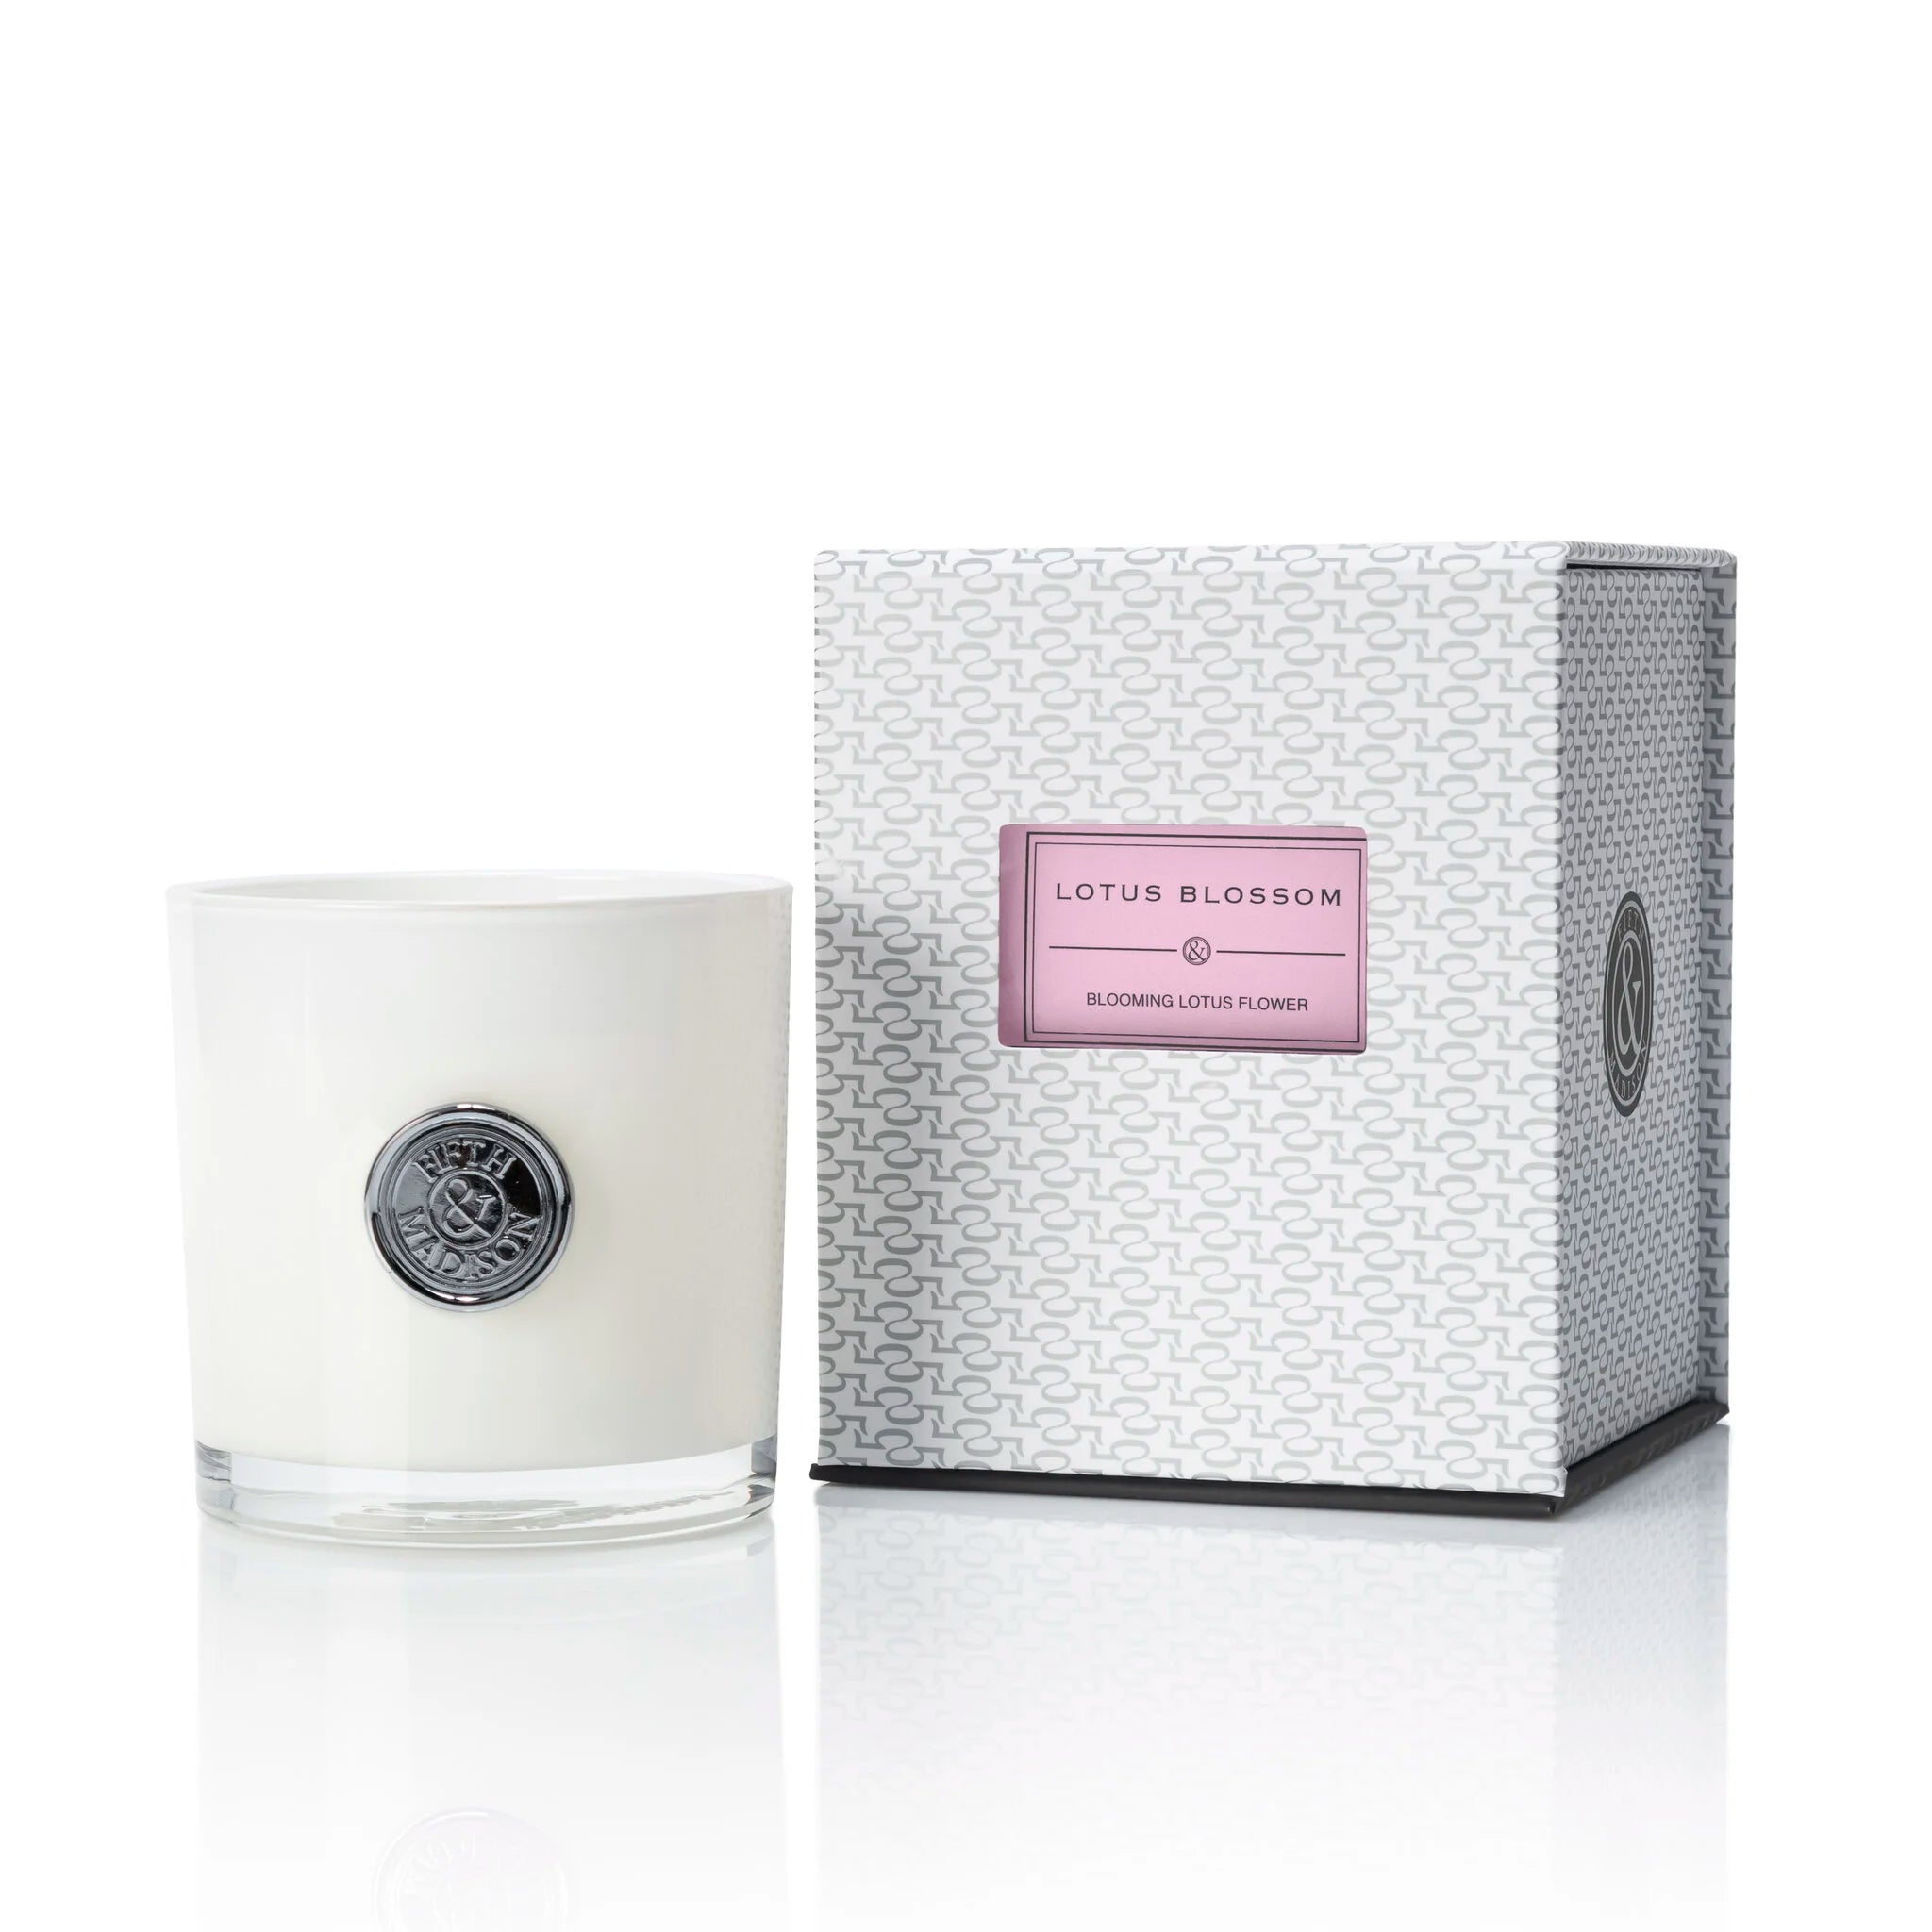 Lotus Blossom Greenwich Single Wick Candle